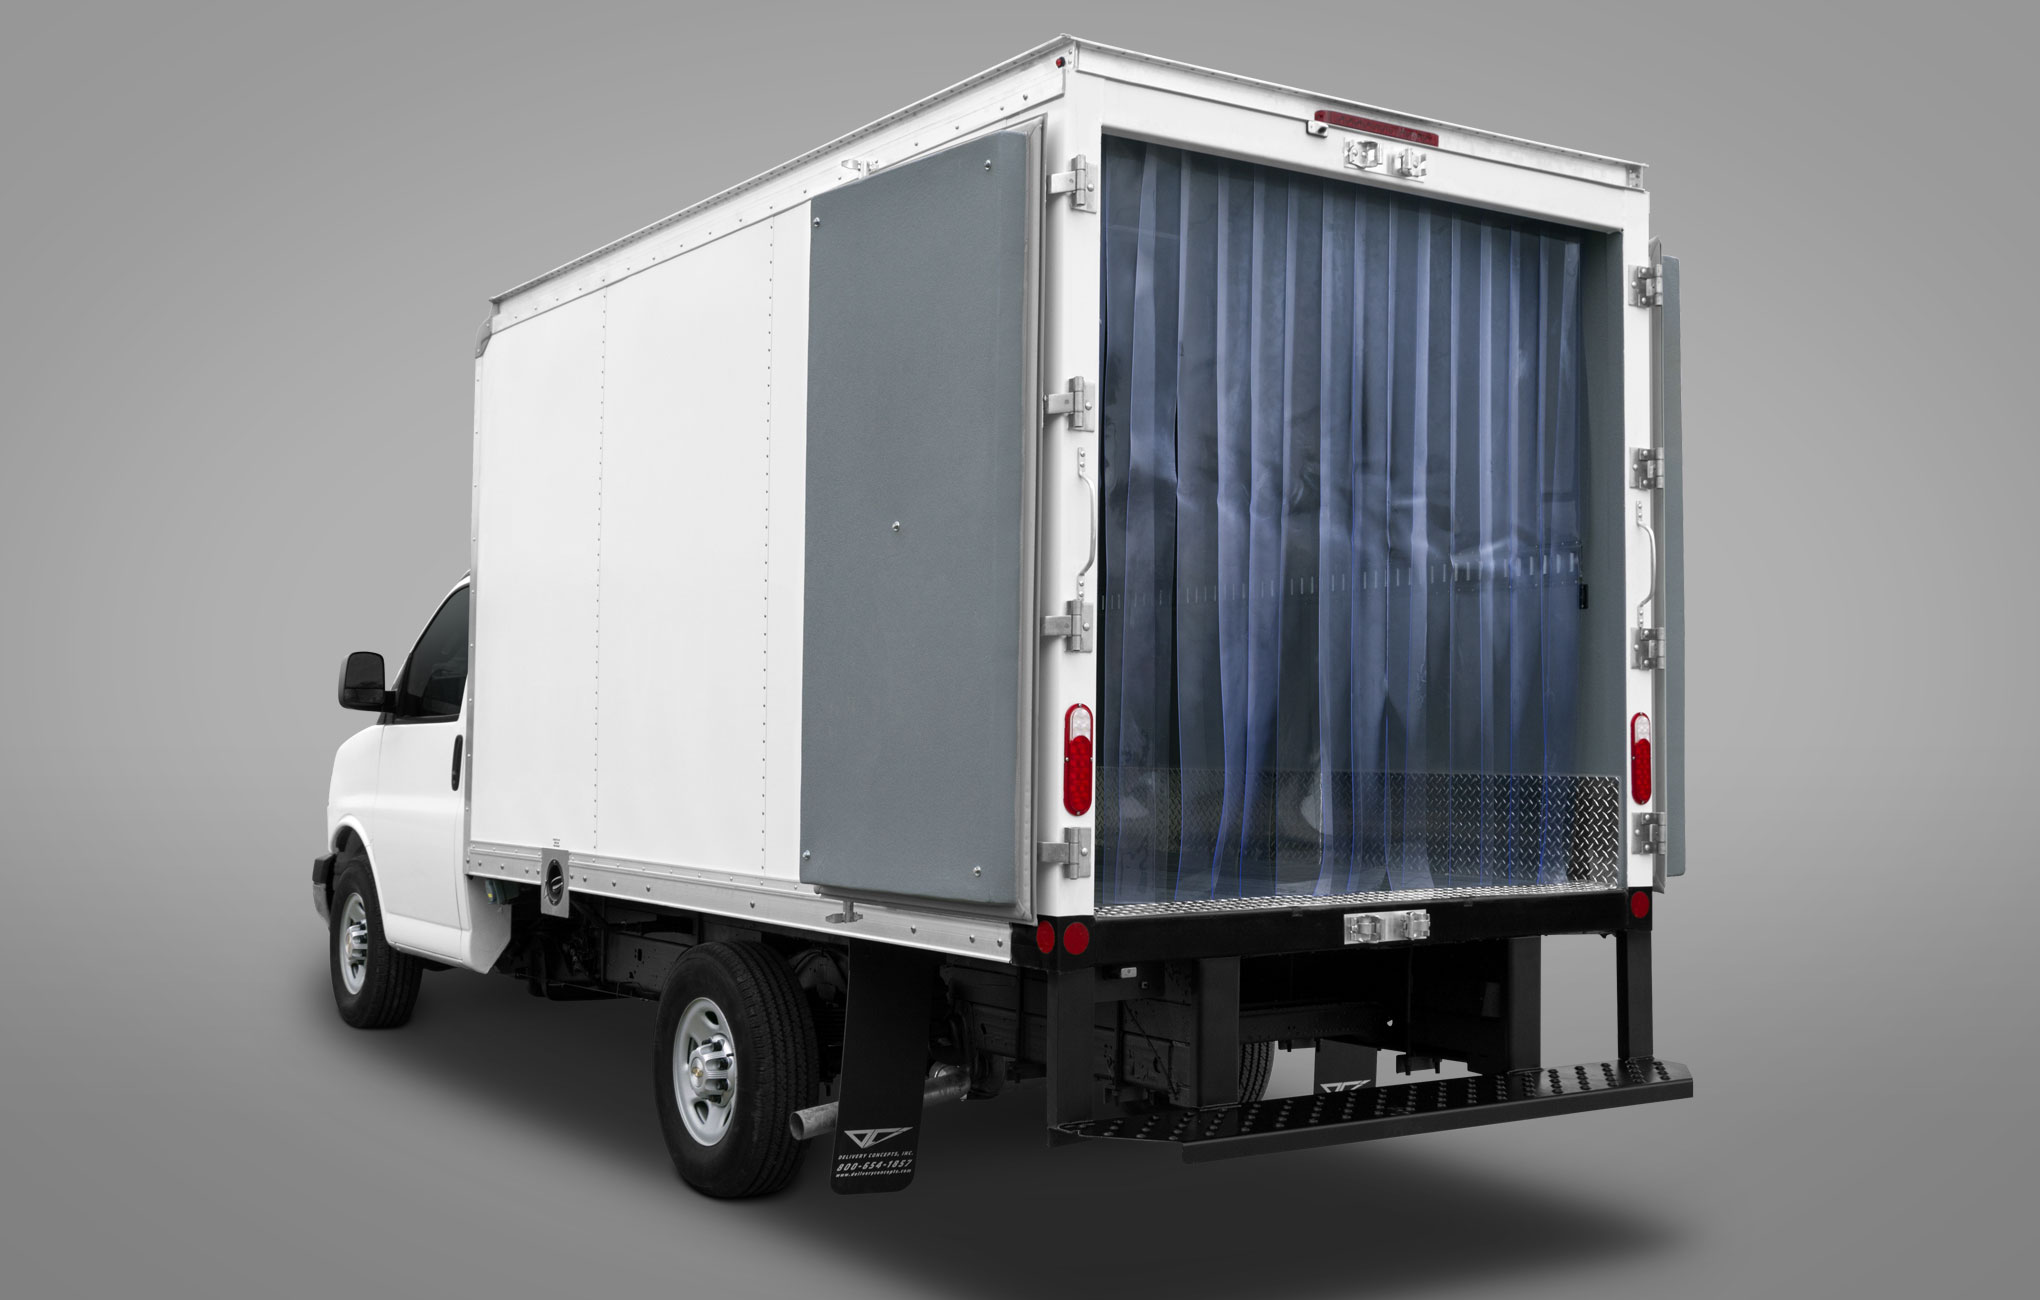 Rear 3/4 angle of refrigerated box truck with back doors open to see the inside and refrigerator curtains.